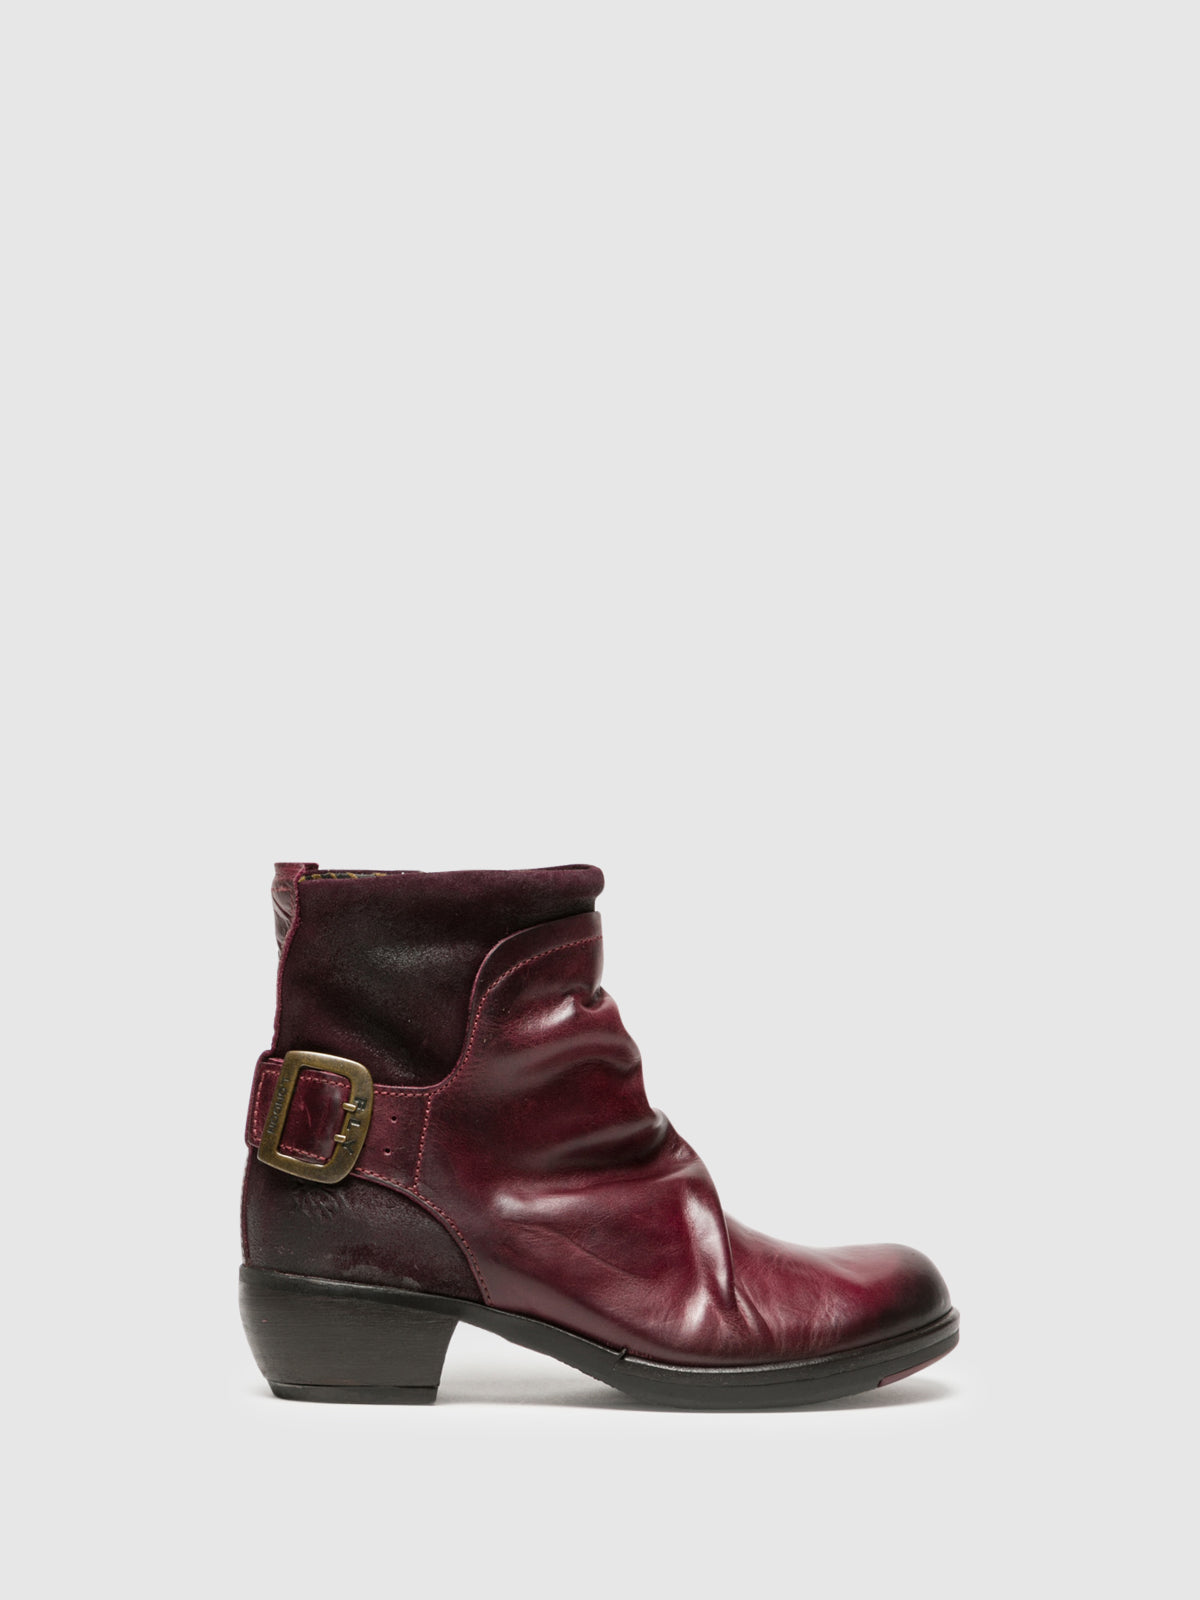 Fly London Purple Buckle Ankle Boots